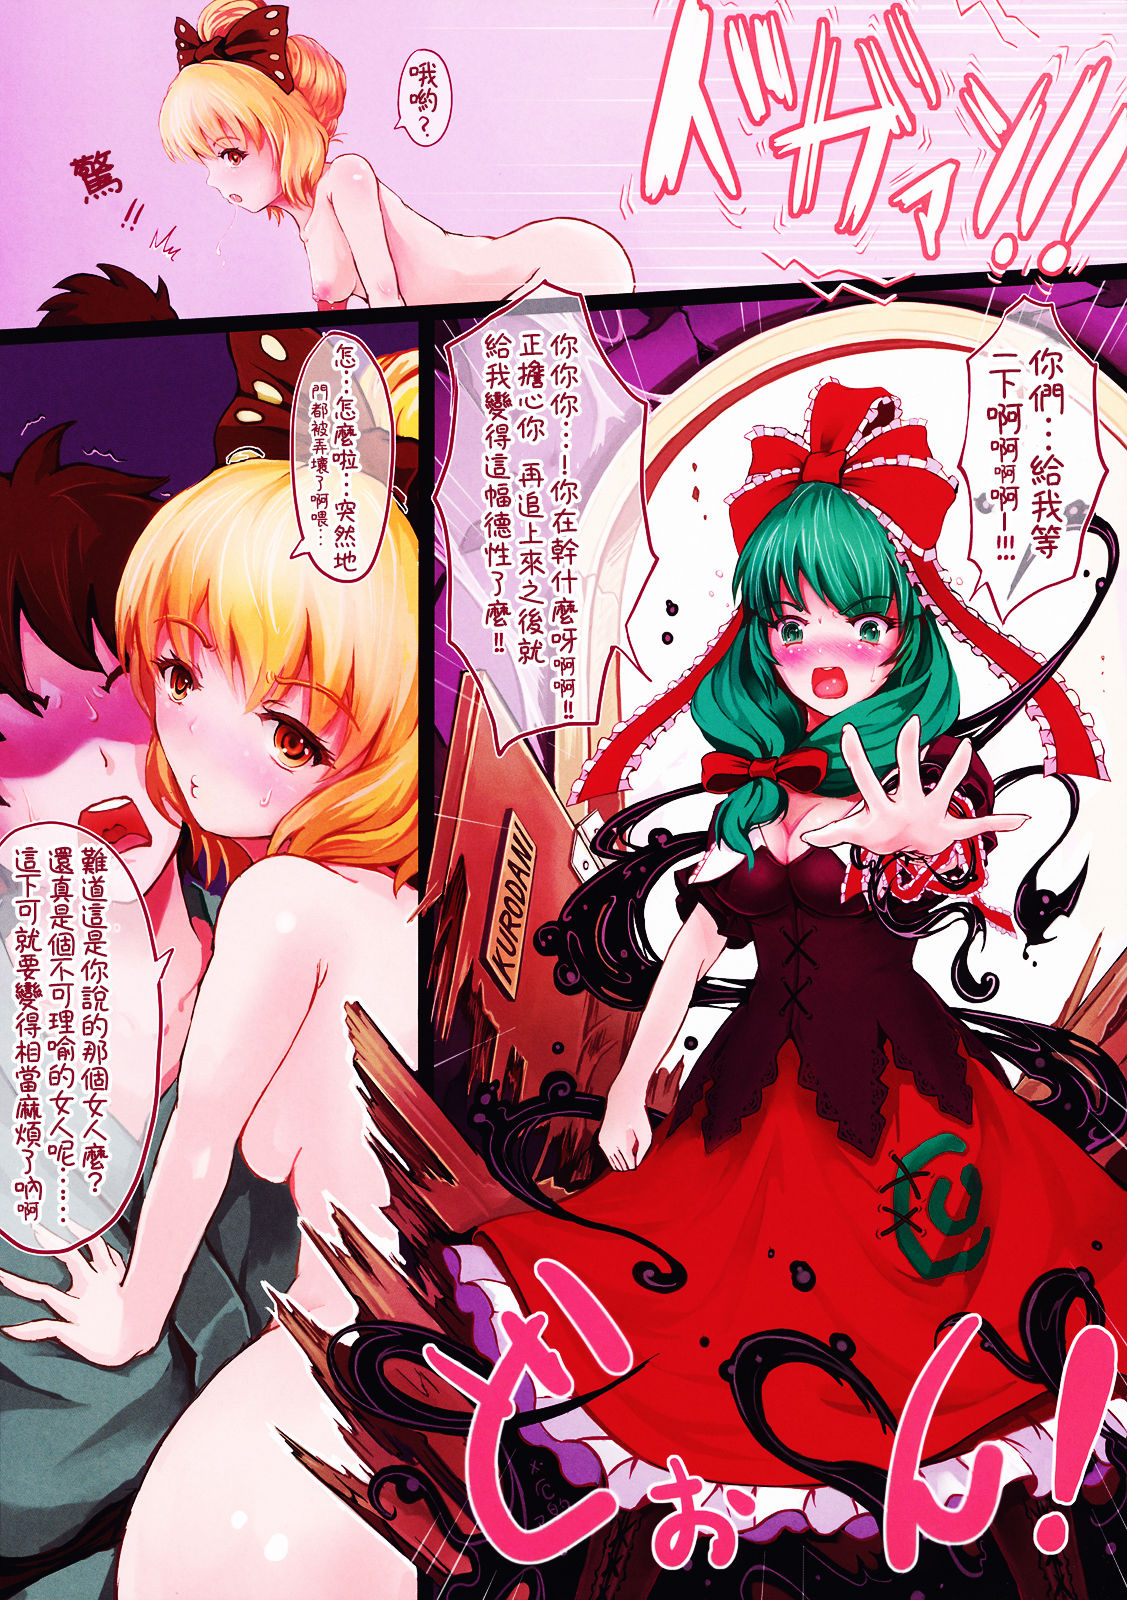 (Reitaisai 9) [dream-mist (sai-go)] TROUBLESOME FEVER (Touhou Project) [Chinese] [oo君の個人漢化] (例大祭9) [dream-mist (sai-go)] TROUBLESOME FEVER (東方Project) [中文翻譯]